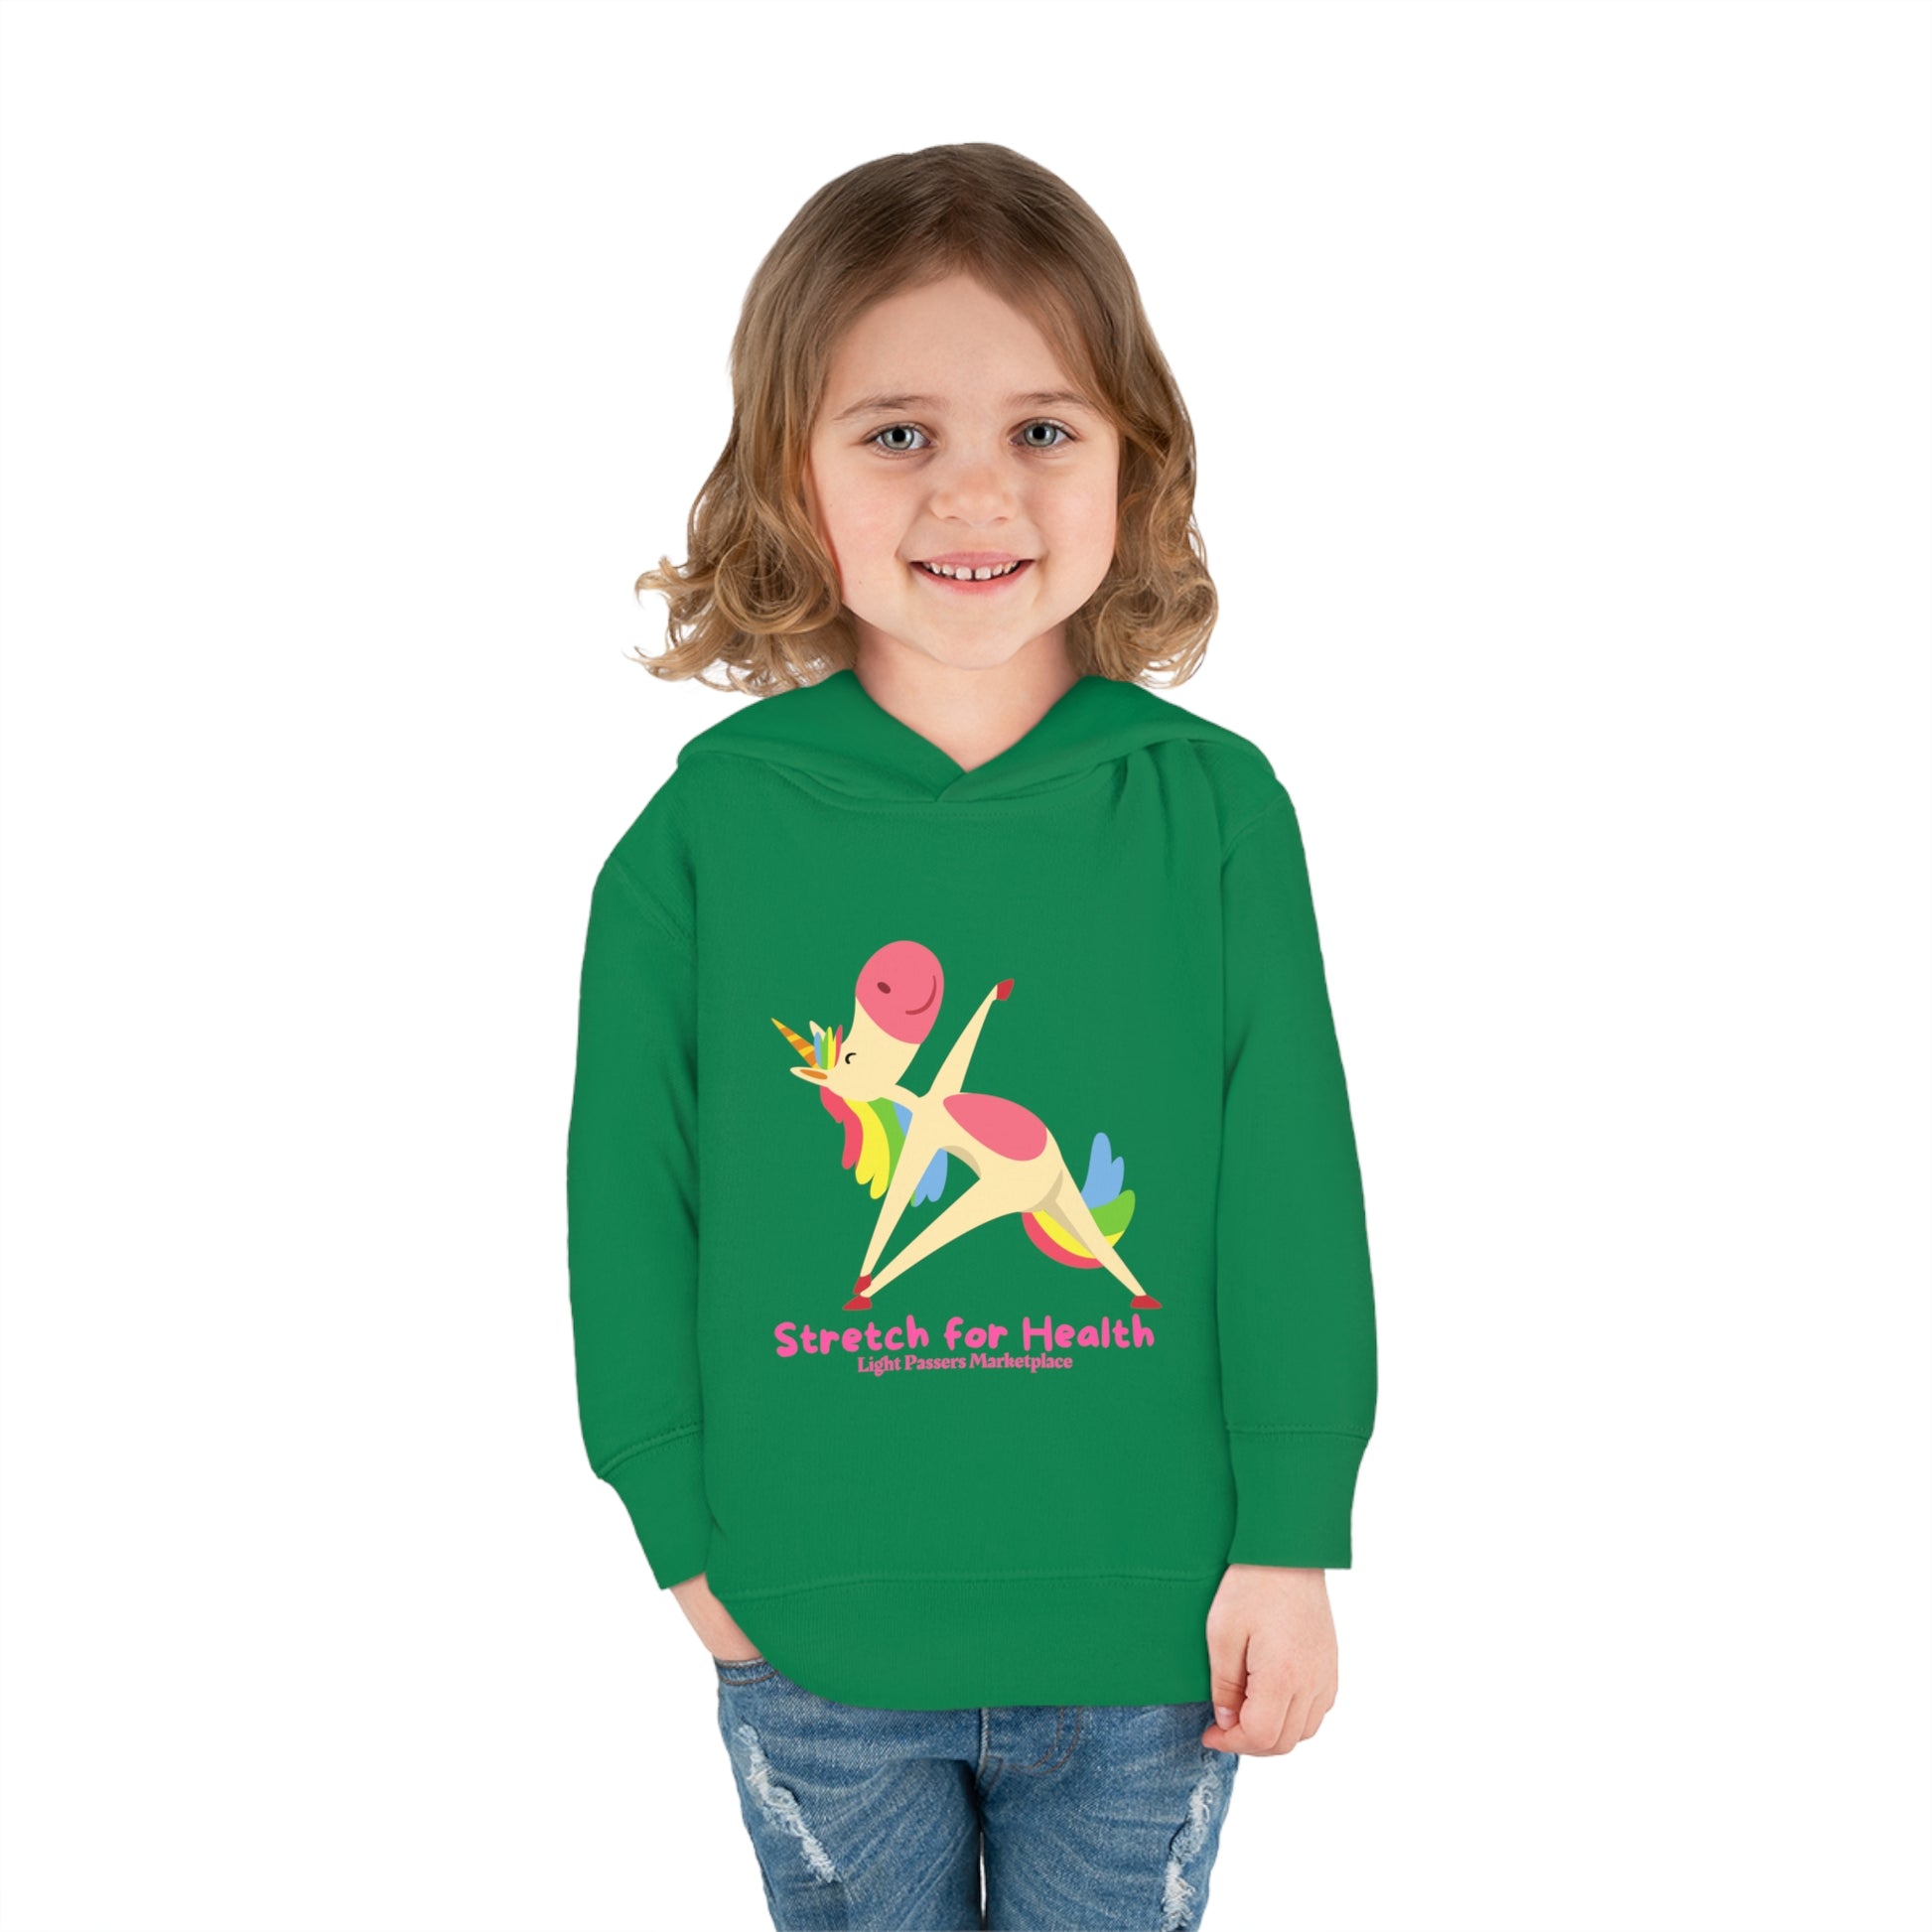 A smiling girl in a Unicorn Stretch Toddler Hooded Sweatshirt with a cartoon unicorn design, showcasing jersey-lined hood and side seam pockets for durable comfort.